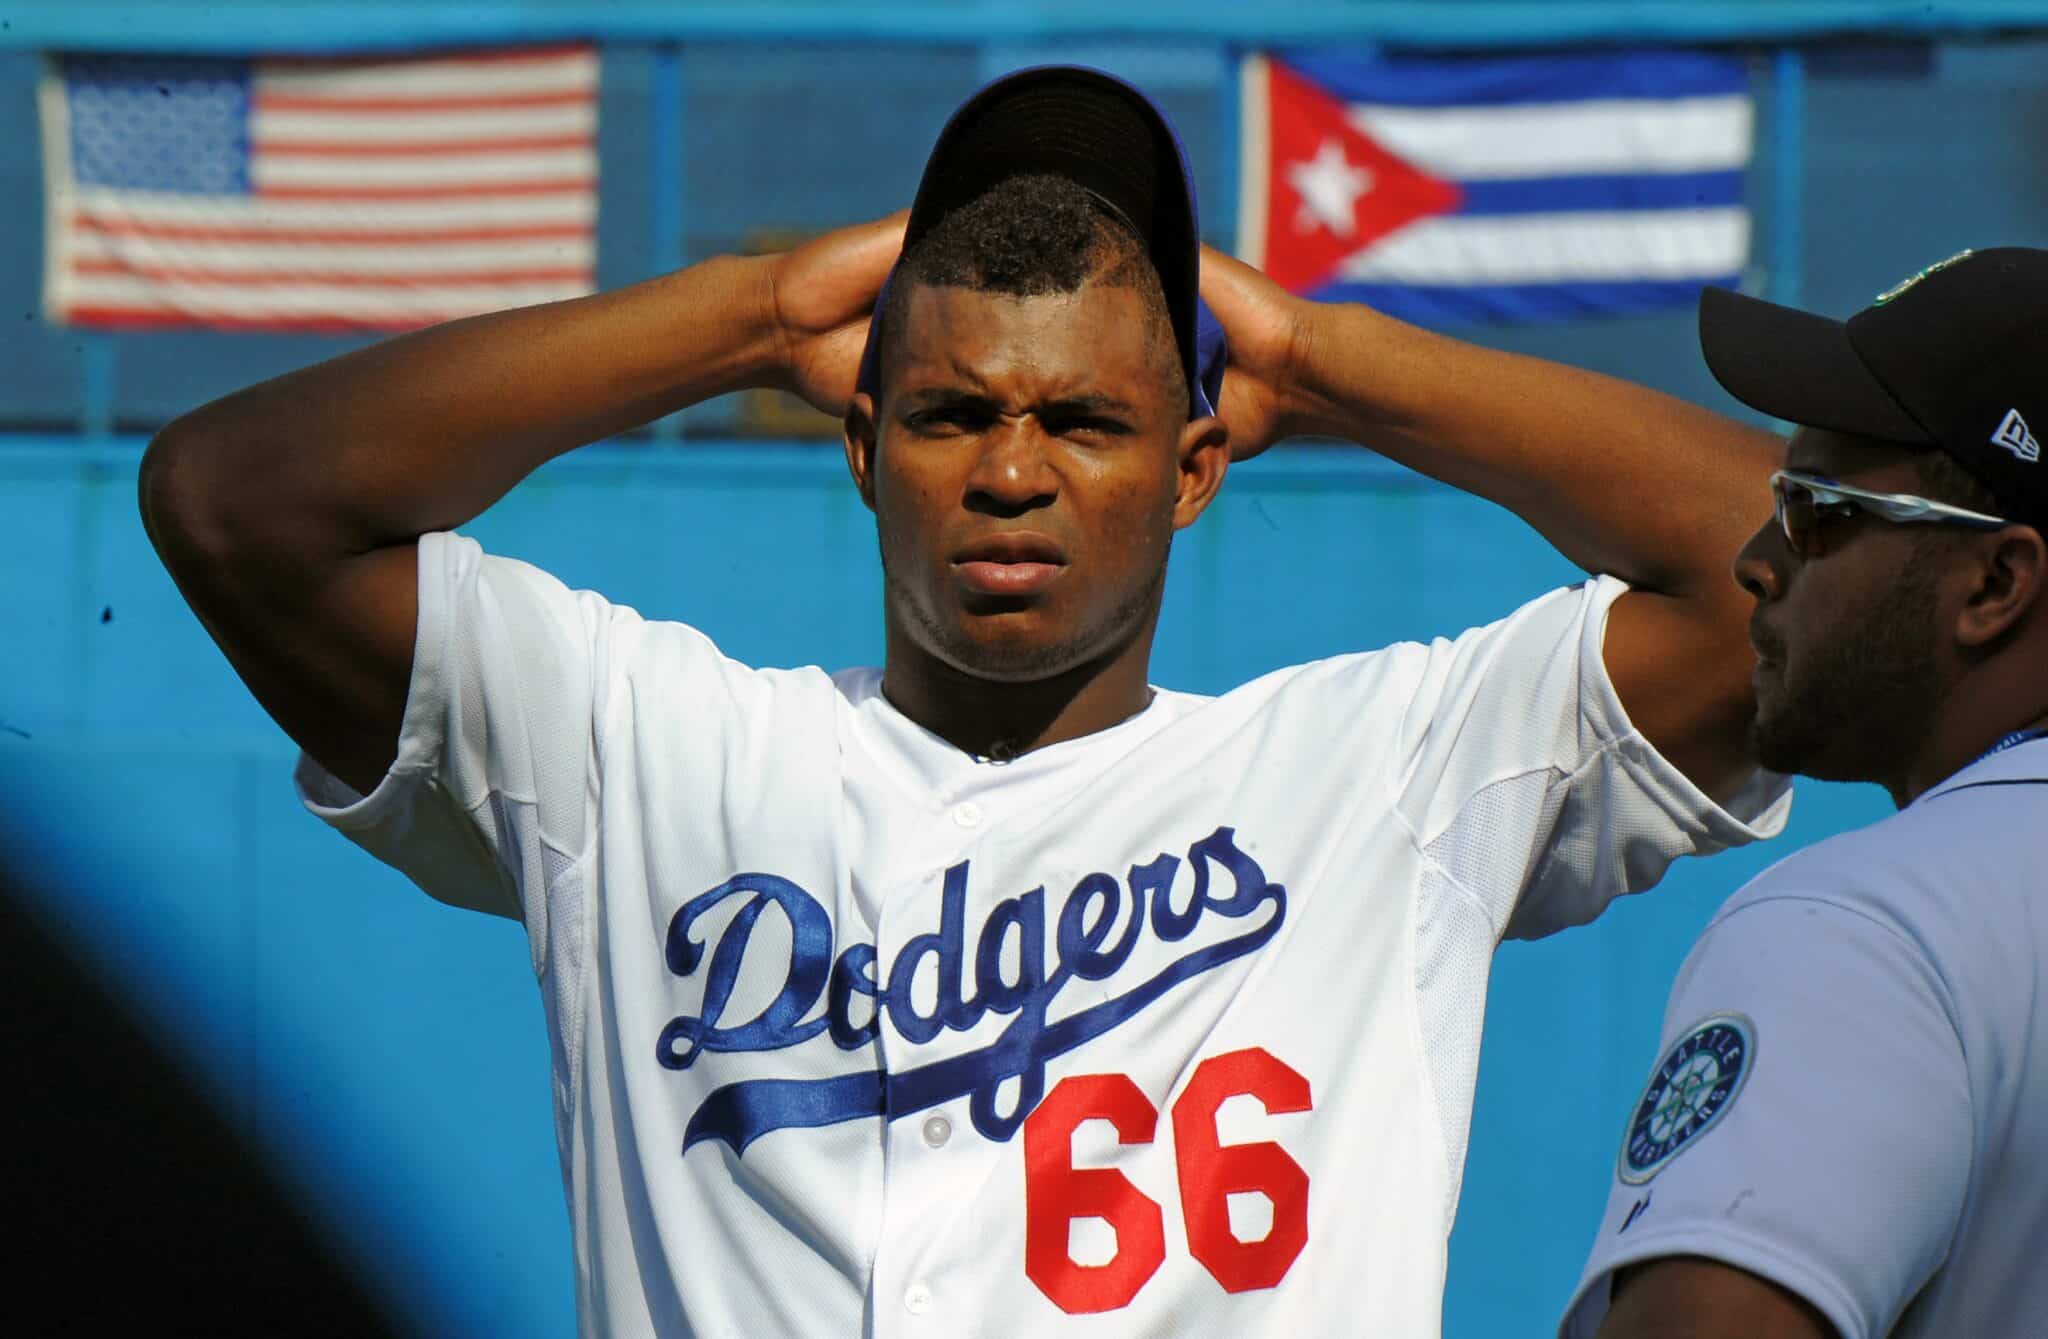 Cuban MLB player Yasiel Puig gestures during a children baseball training session at the Latin American Stadium in Havana, on December 16, 2015. Cuban baseball stars Jose Abreu and Yasiel Puig returned home Tuesday for the first time since defecting to join the American big leagues, part of an unprecedented Major League Baseball tour made possible by the thaw in US-Cuban relations. The delegation also includes Cuban-born player Alexei Ramirez, a free agent who left Cuba legally by marrying a Dominican in 2007.    / AFP / YAMIL LAGE        (Photo credit should read YAMIL LAGE/AFP via Getty Images)